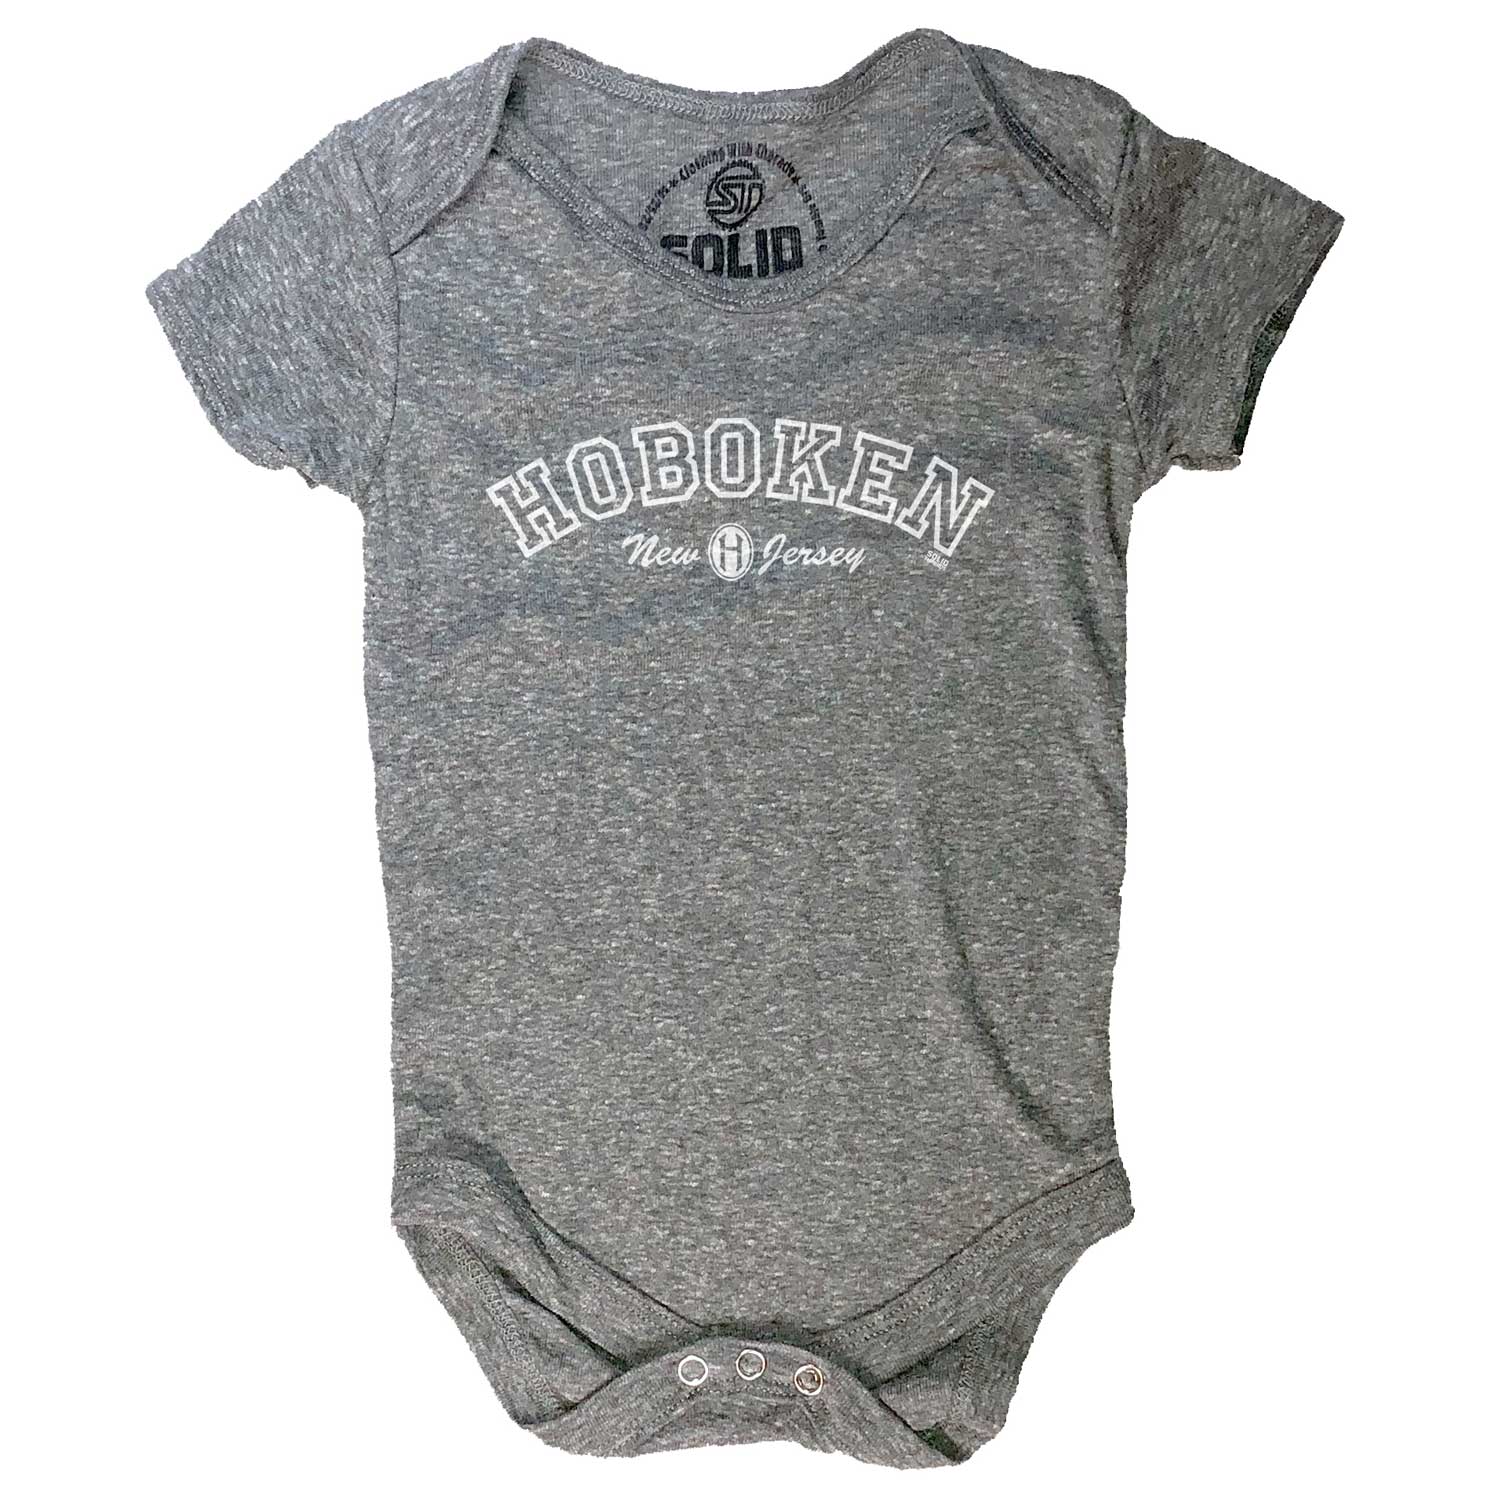 Baby Hoboken Collegiate Cool Graphic One Piece | Retro New Jersey Triblend Romper | Solid Threads